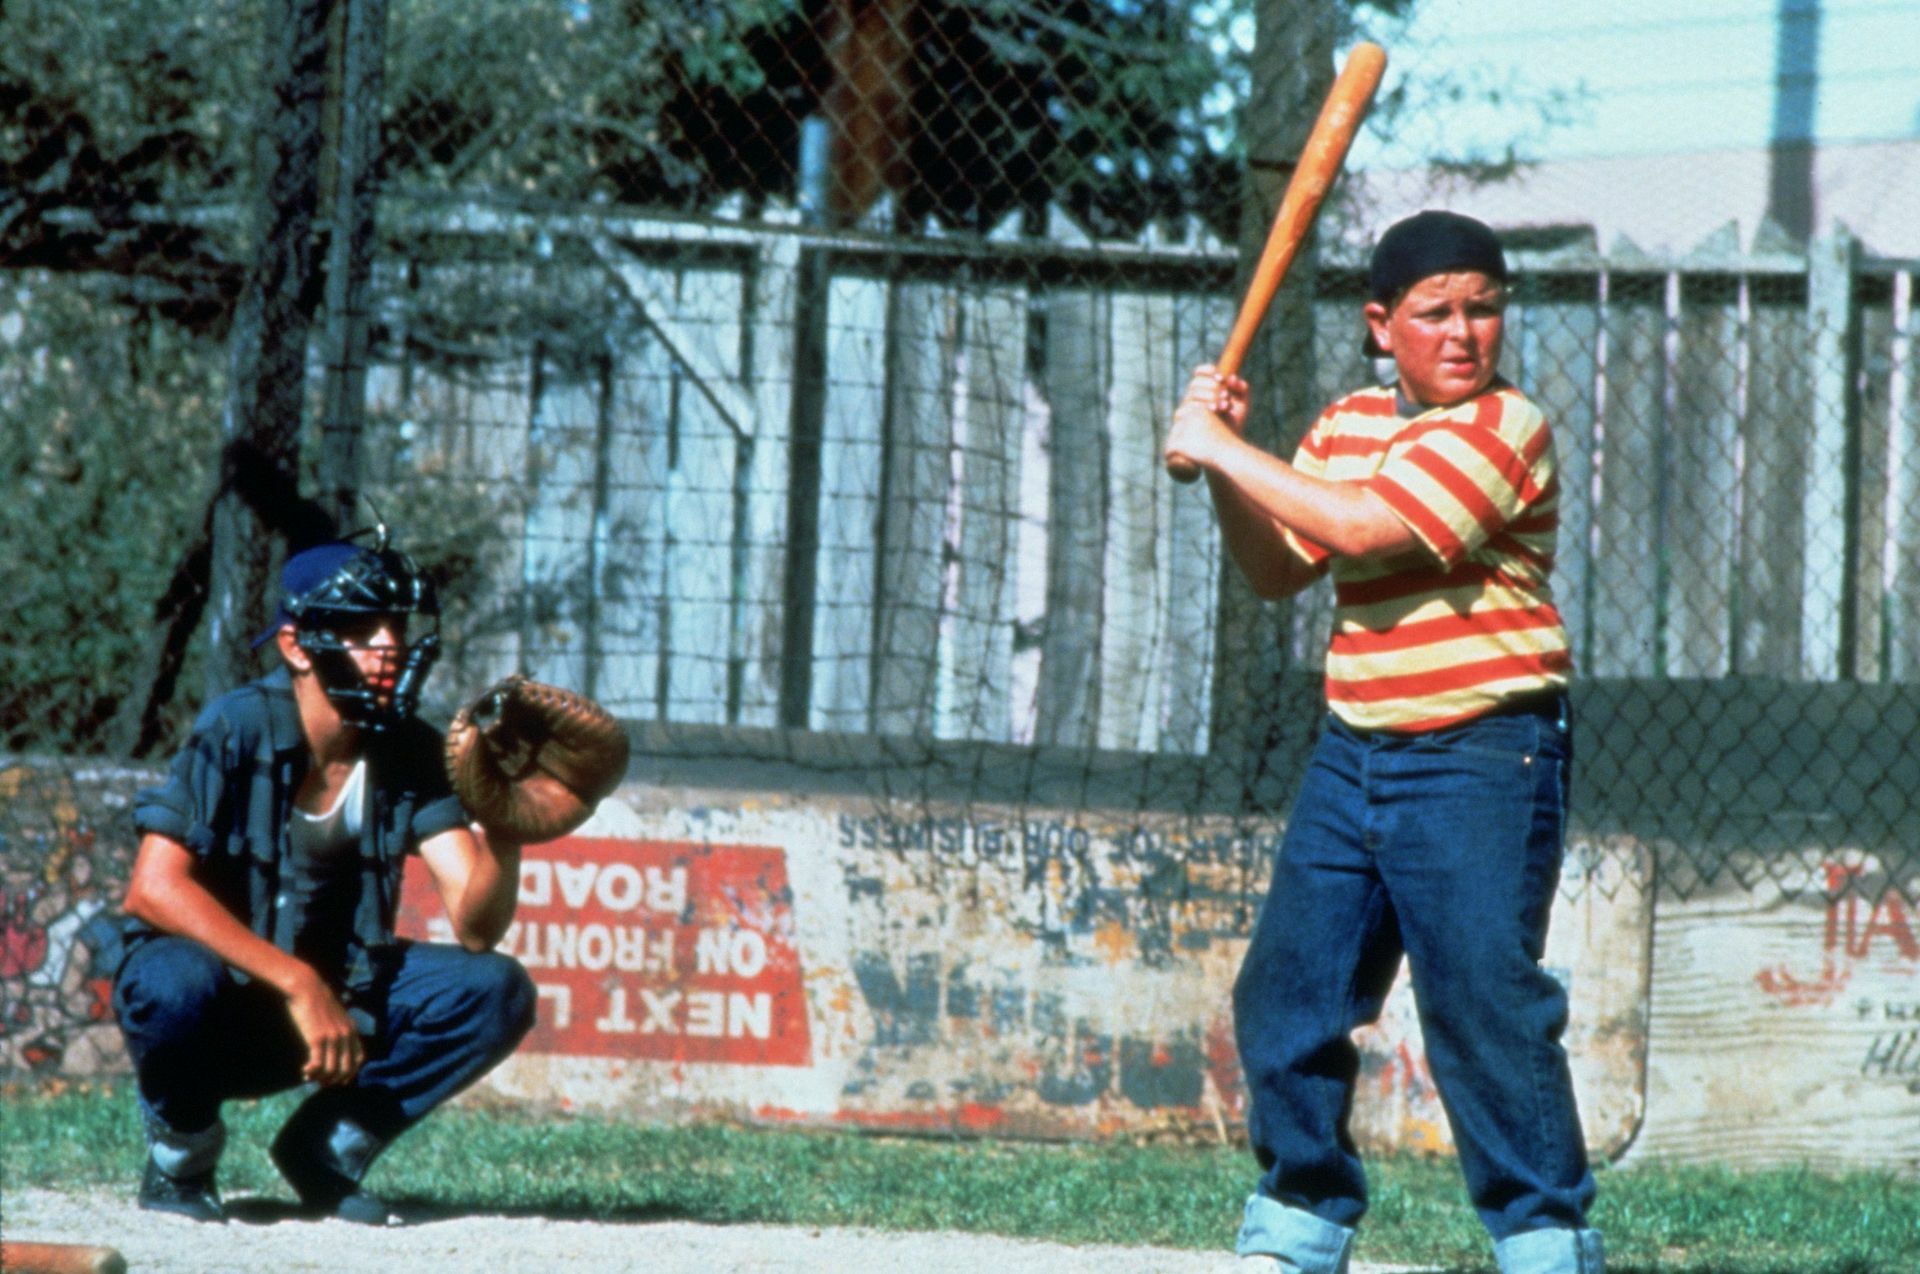 "The Sandlot" has aged quite a bit but is still full of classic moments.